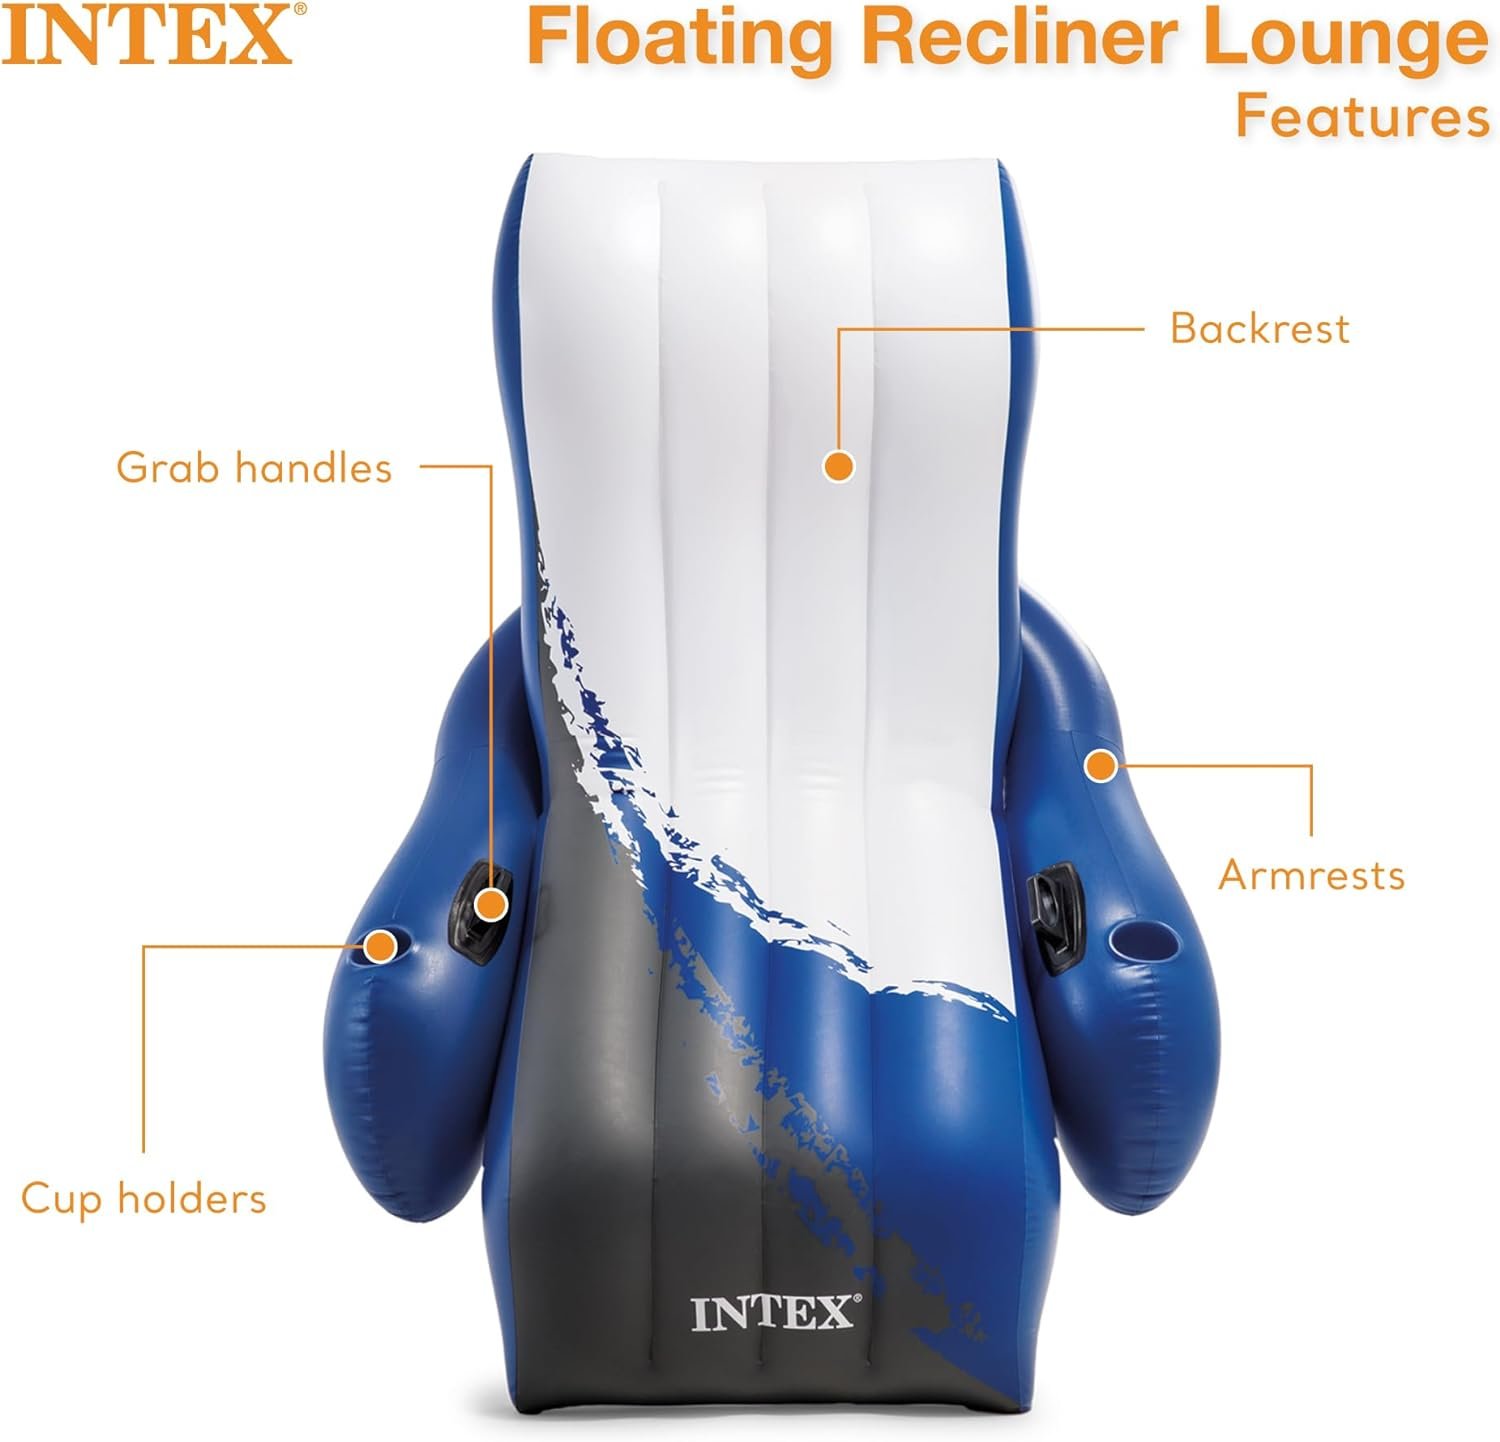 Intex Inflatable Lounge Pool Recliner Lounger Chair with Cup Holders Review